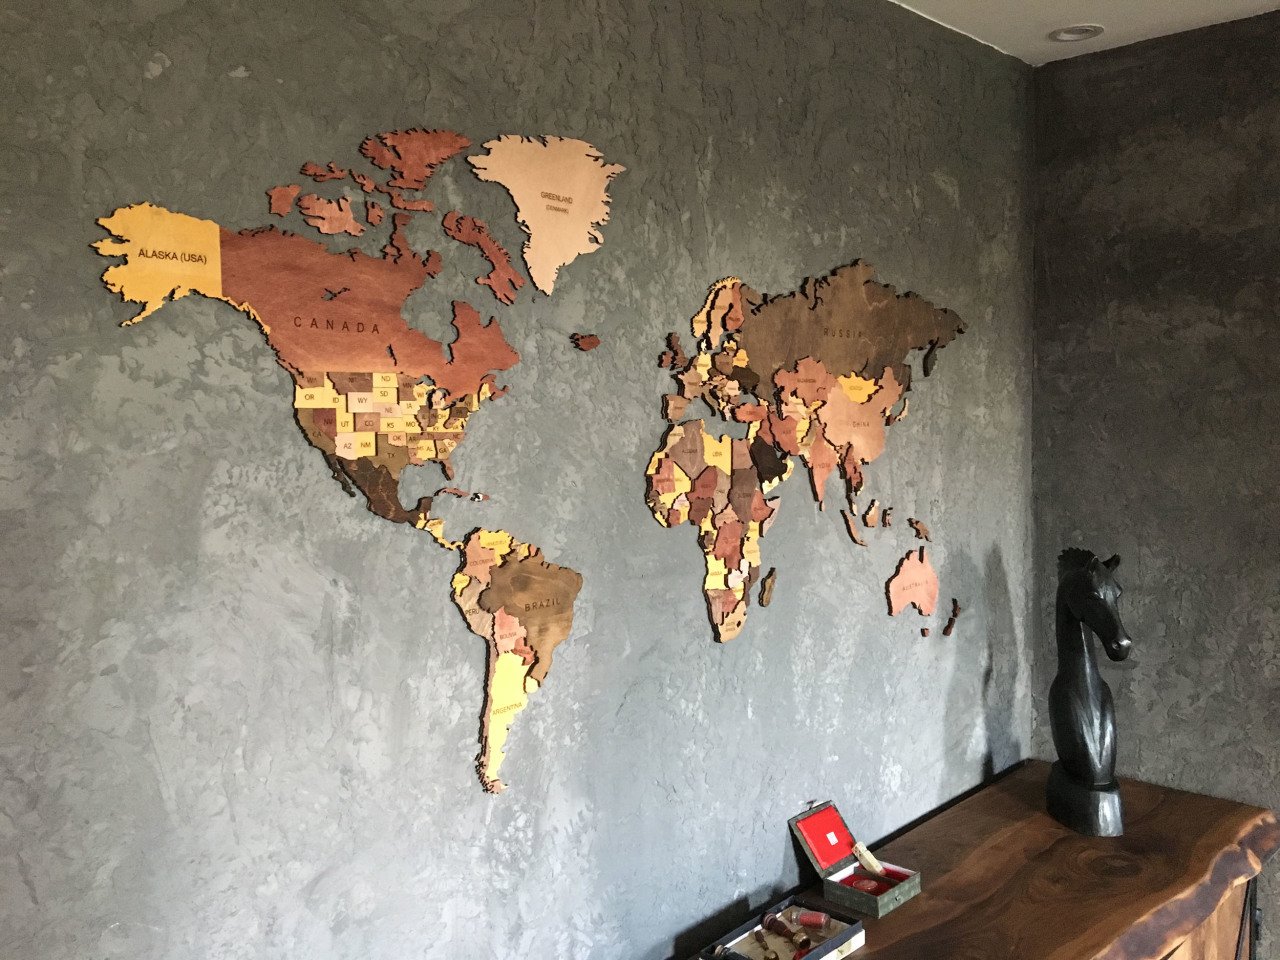 Wooden World Map 3D by Woody Signs Co. - Handmade Crafted Unique Wooden Creative